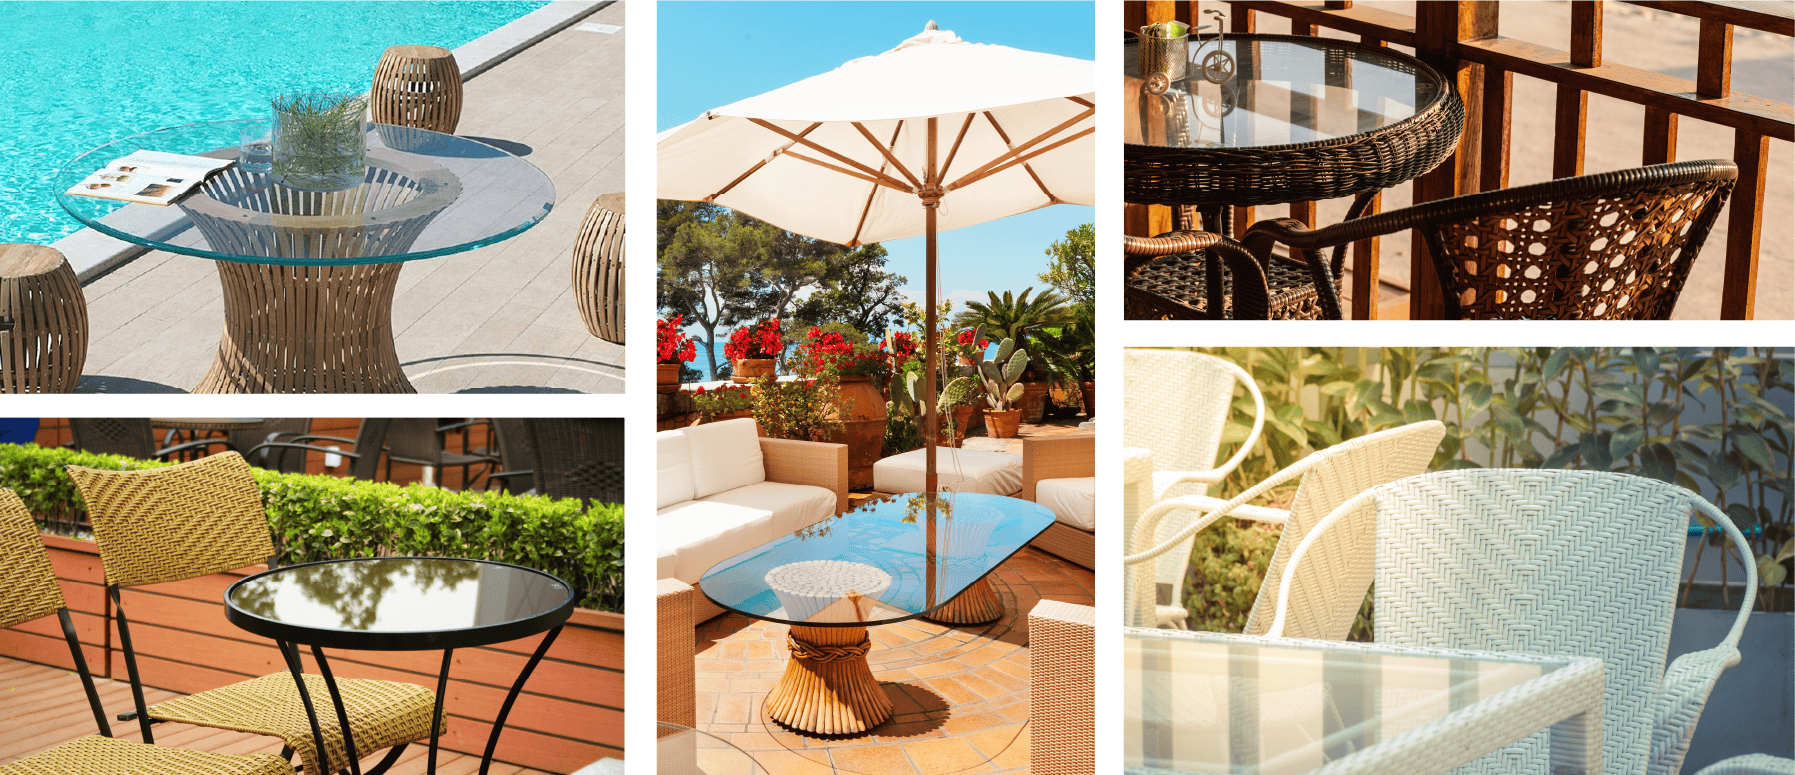 A collage of outdoor furniture, including 5 glass tabletops, showcased in tropical patios.